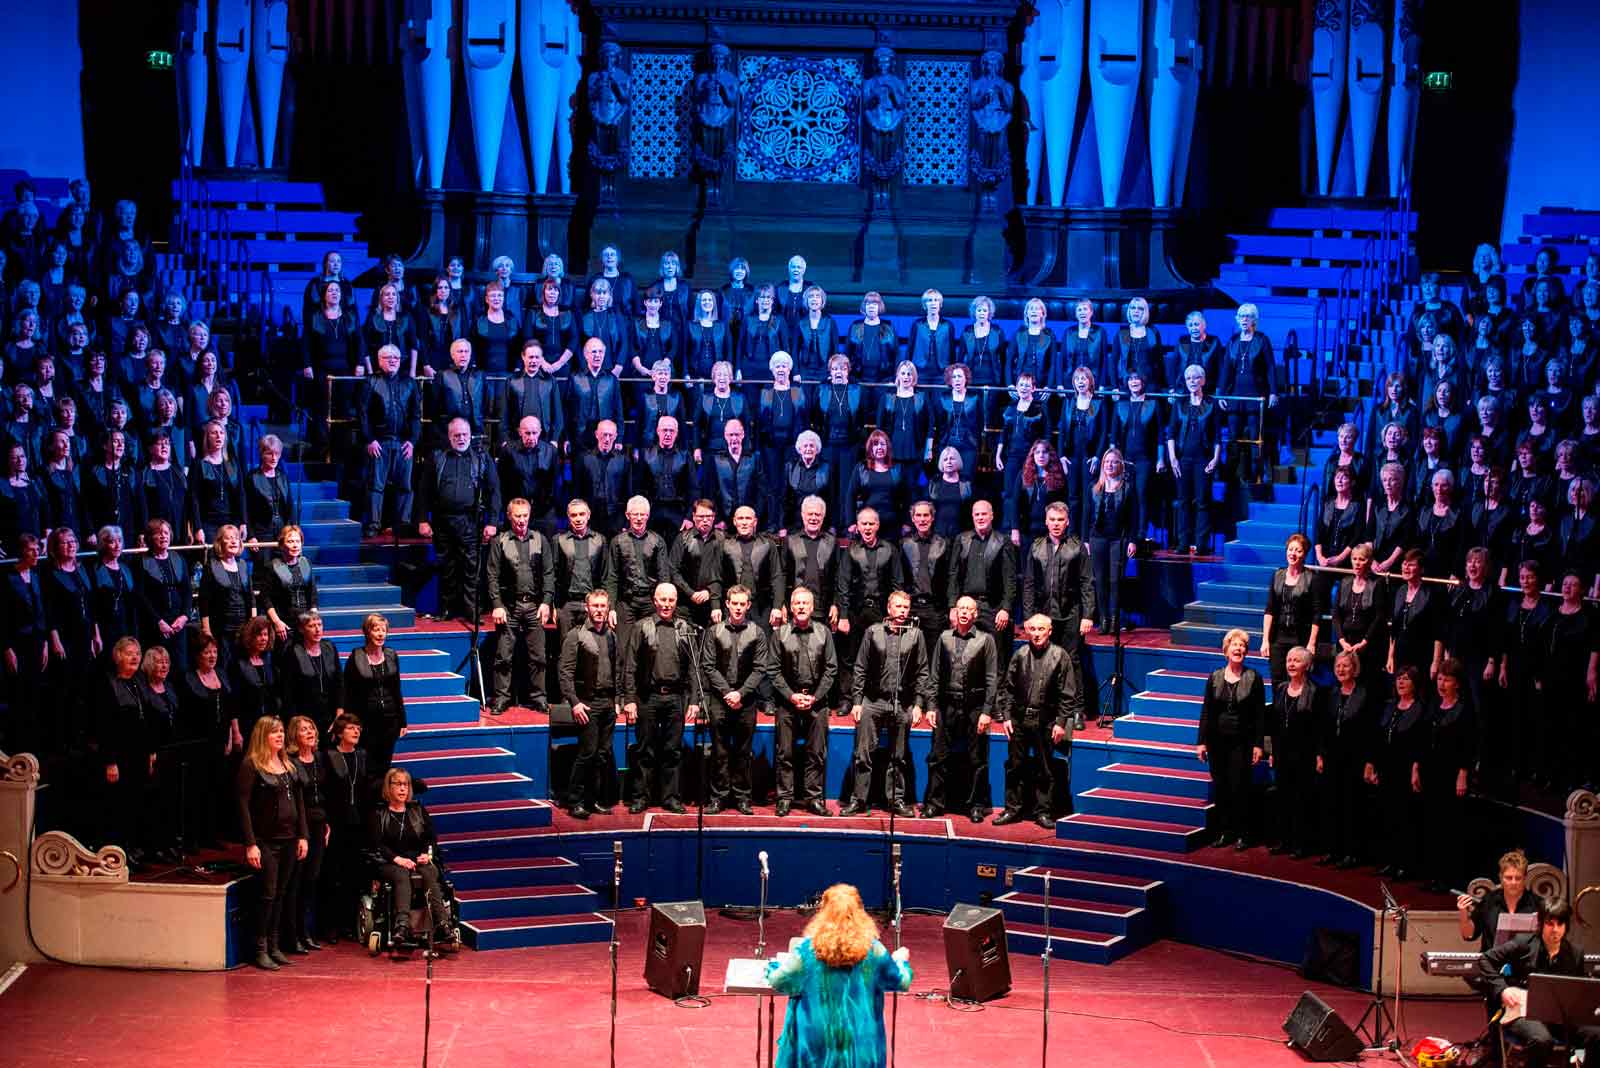 Rock Up and Sing! will perform two concerts at Leeds Town Hall in July